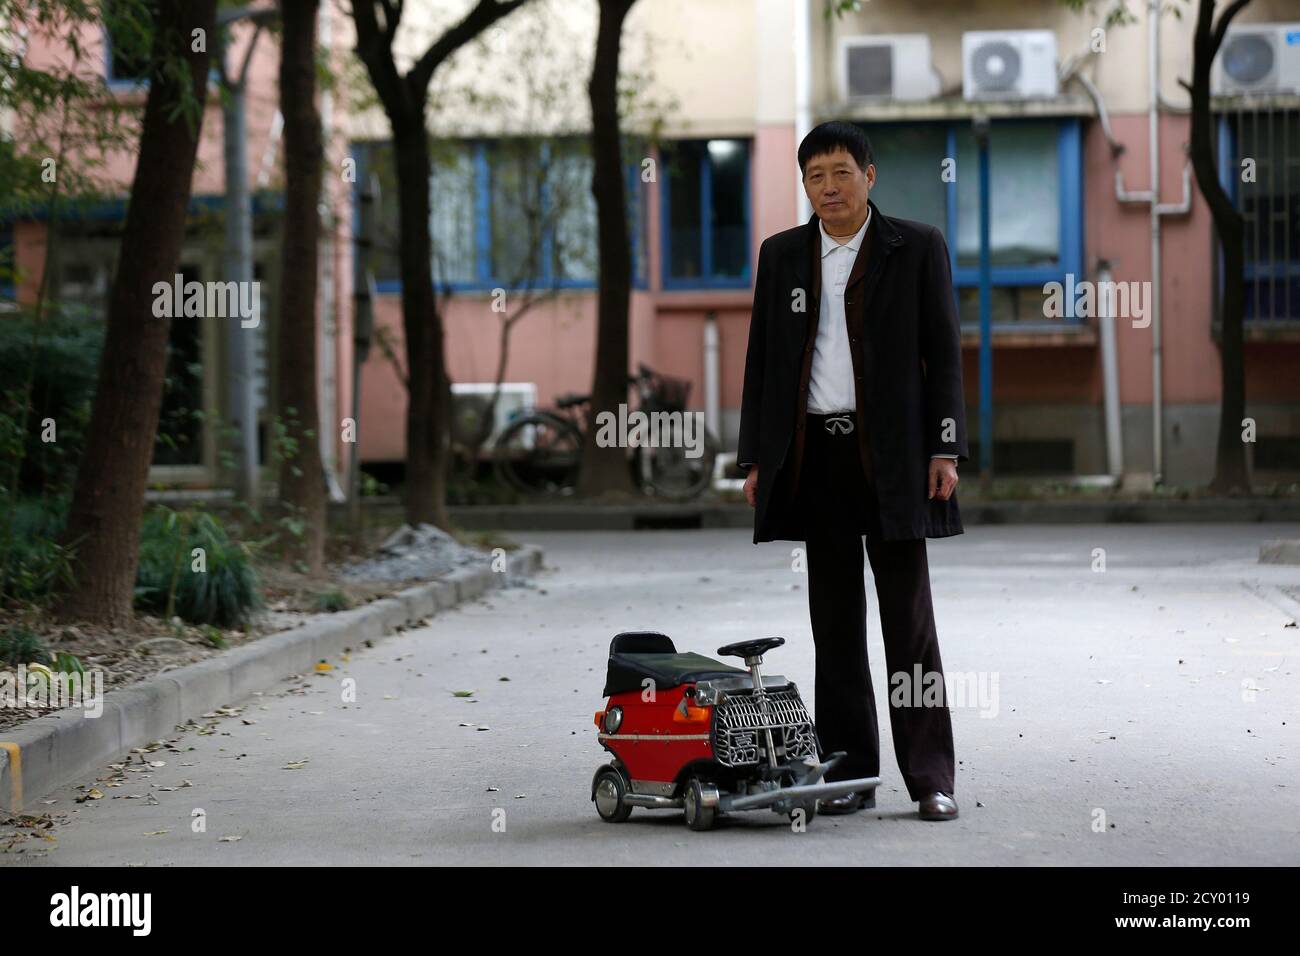 Xu Zhiyun, 60, poses with his home-made motorised mini-vehicle at a street in Shanghai December 9, 2014. Xu spent over two years to complete the mini-vehicle measuring 60cm (24 inches) by 35cm (14 inches) by 40cm (16 inches), which has a 77cc engine and five gear ranges. REUTERS/Aly Song  (CHINA - Tags: SOCIETY TRANSPORT) Stock Photo